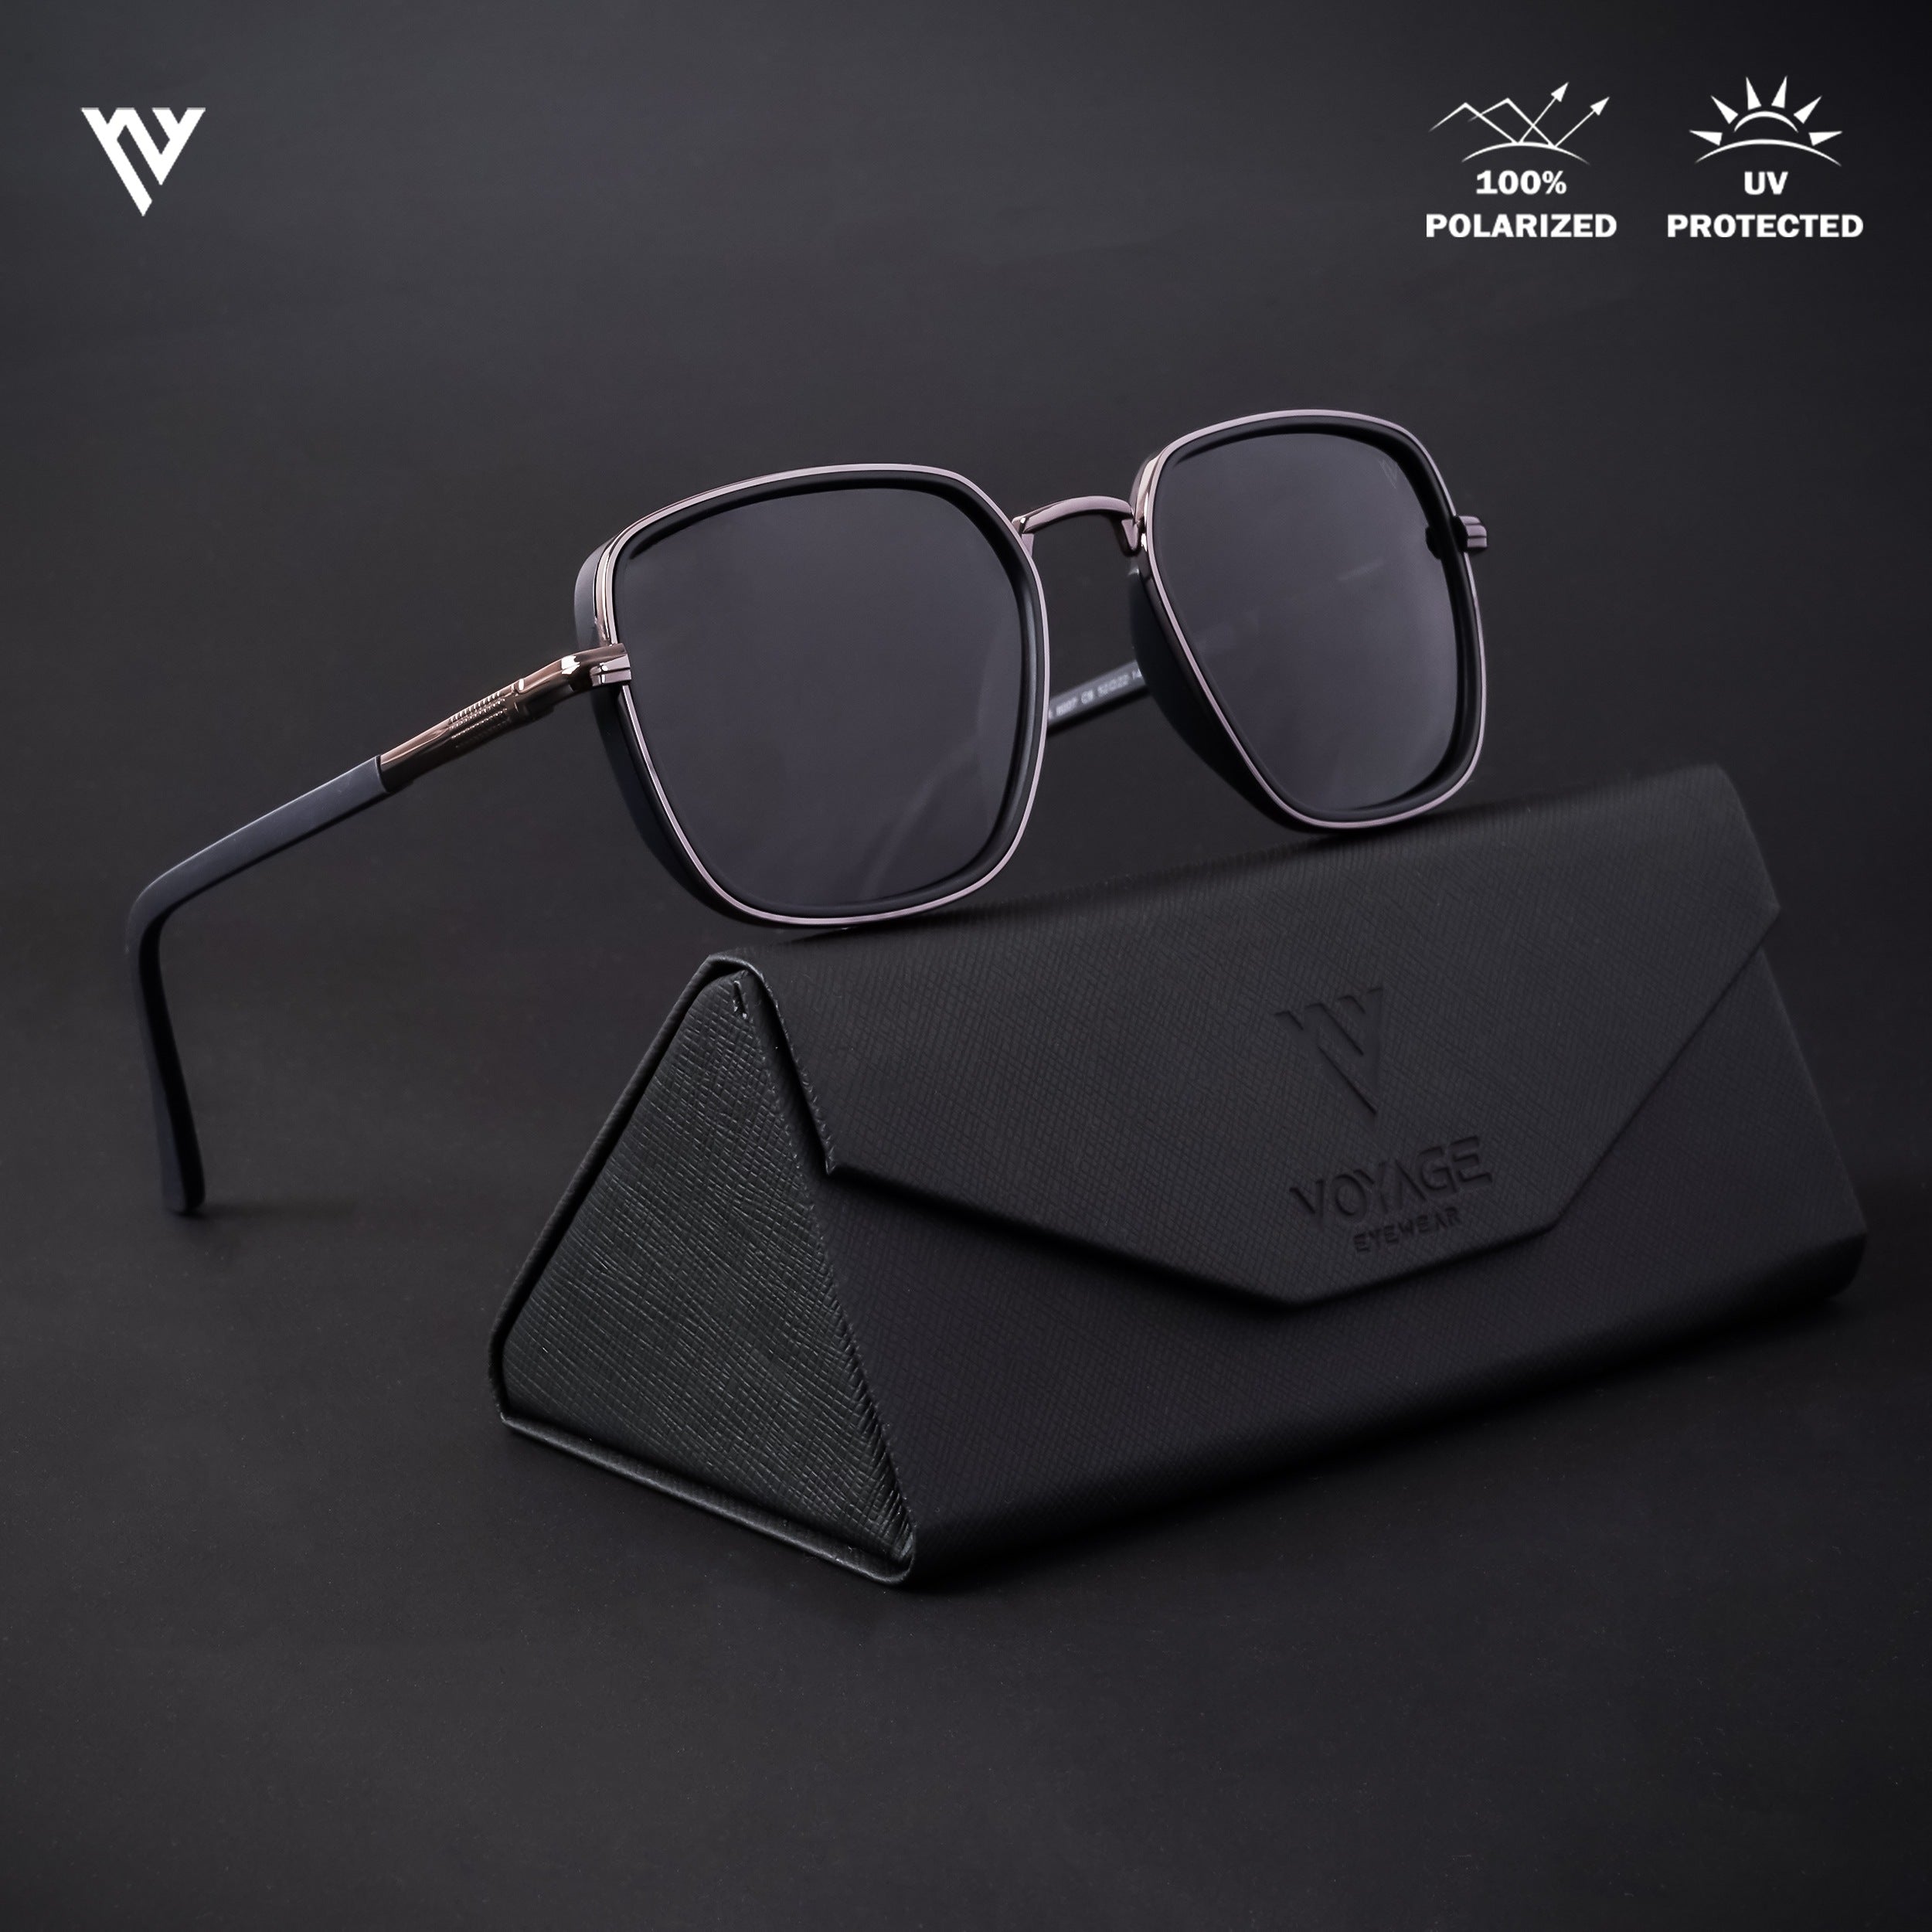 Voyage Exclusive Grey & Navy Blue Polarized Square Sunglasses for Men & Women - PMG4437